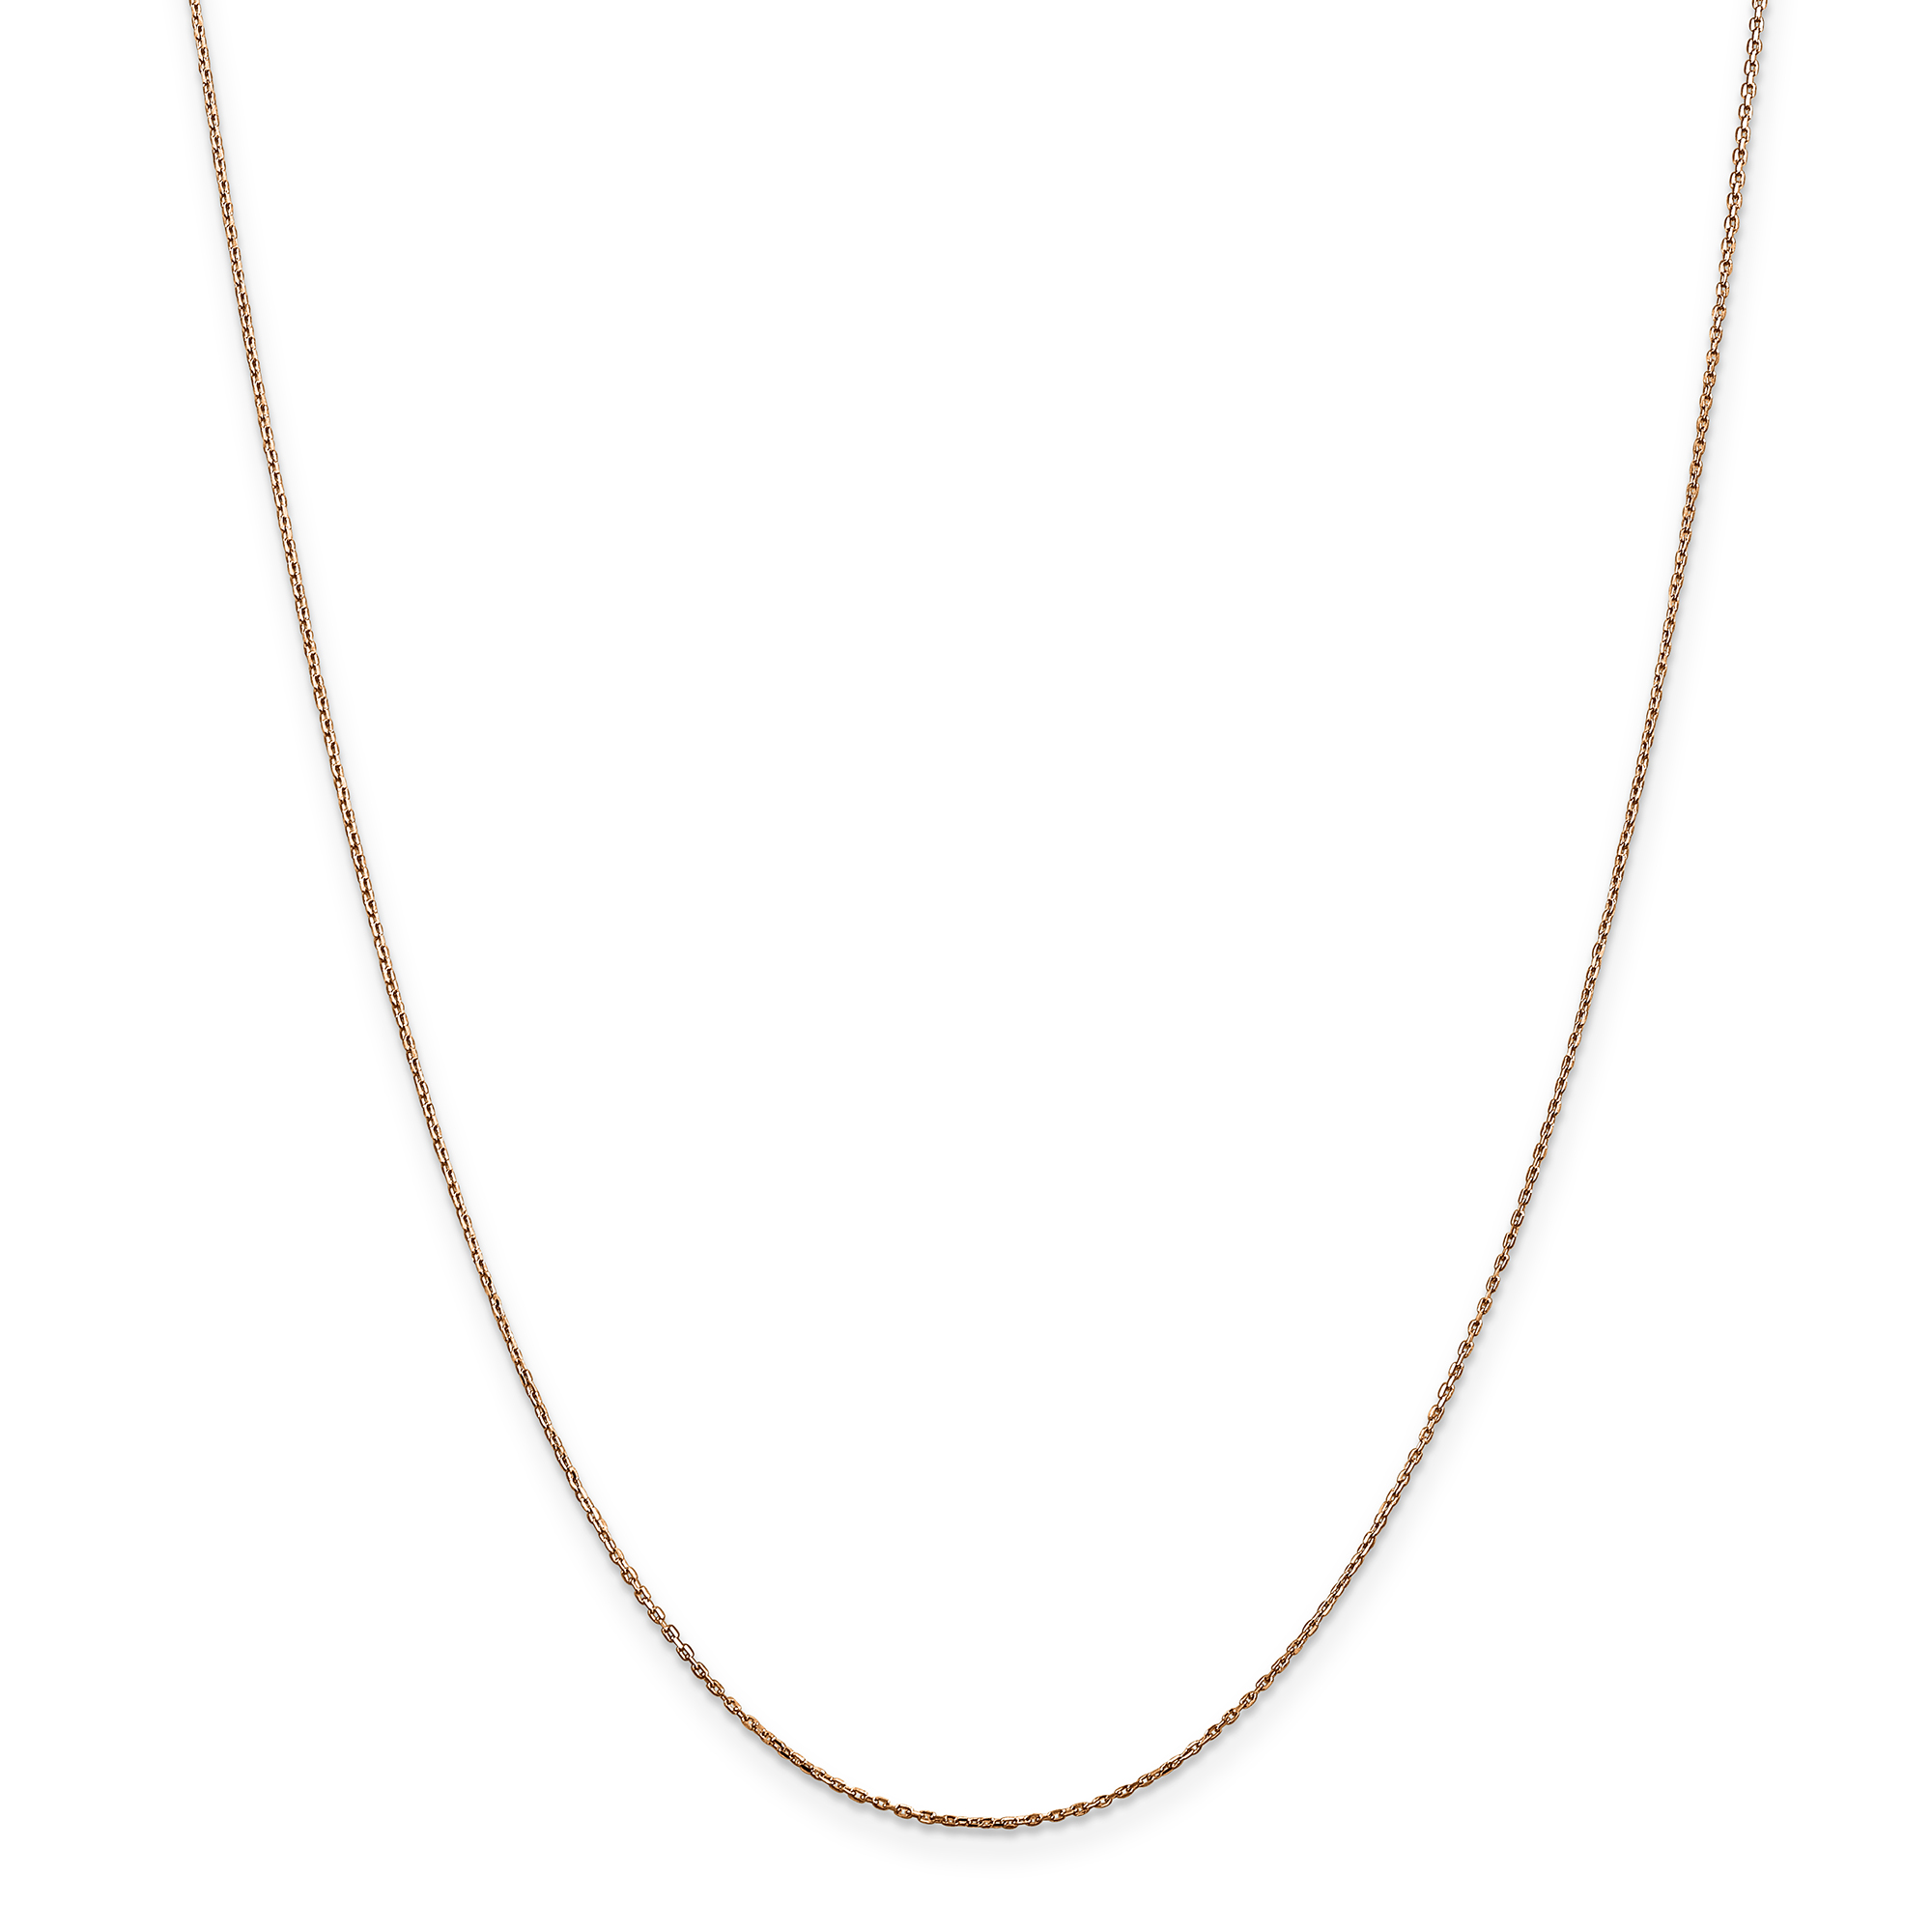 Primal Gold 14 Karat Rose Gold 0.8mm Diamond-cut Cable Chain Necklace ...